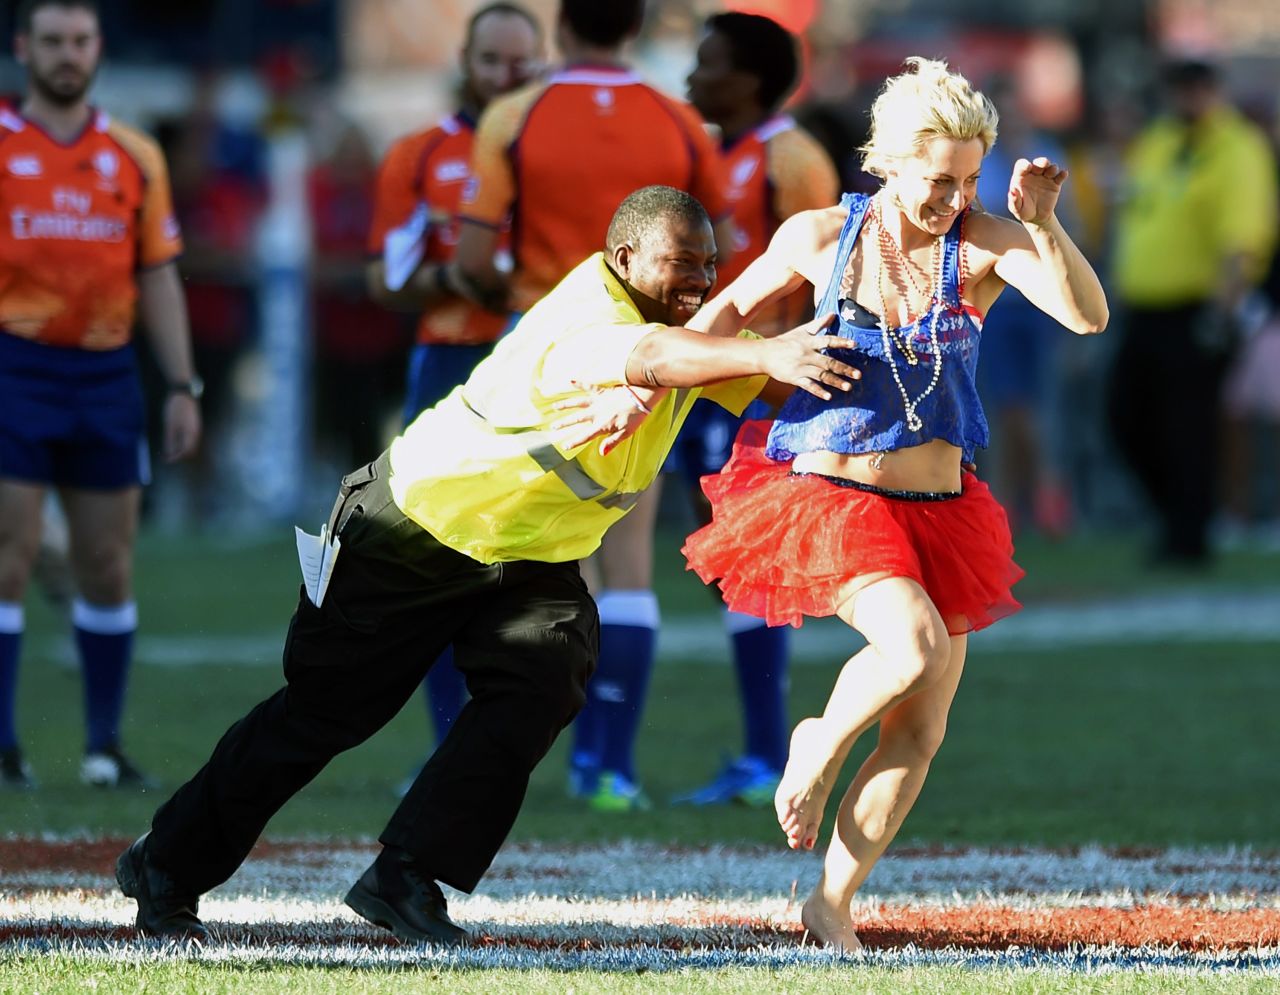 A security guard chases a costumed fan after she ran on the pitch during the 2015 Cup Final match between Fiji and New Zealand.